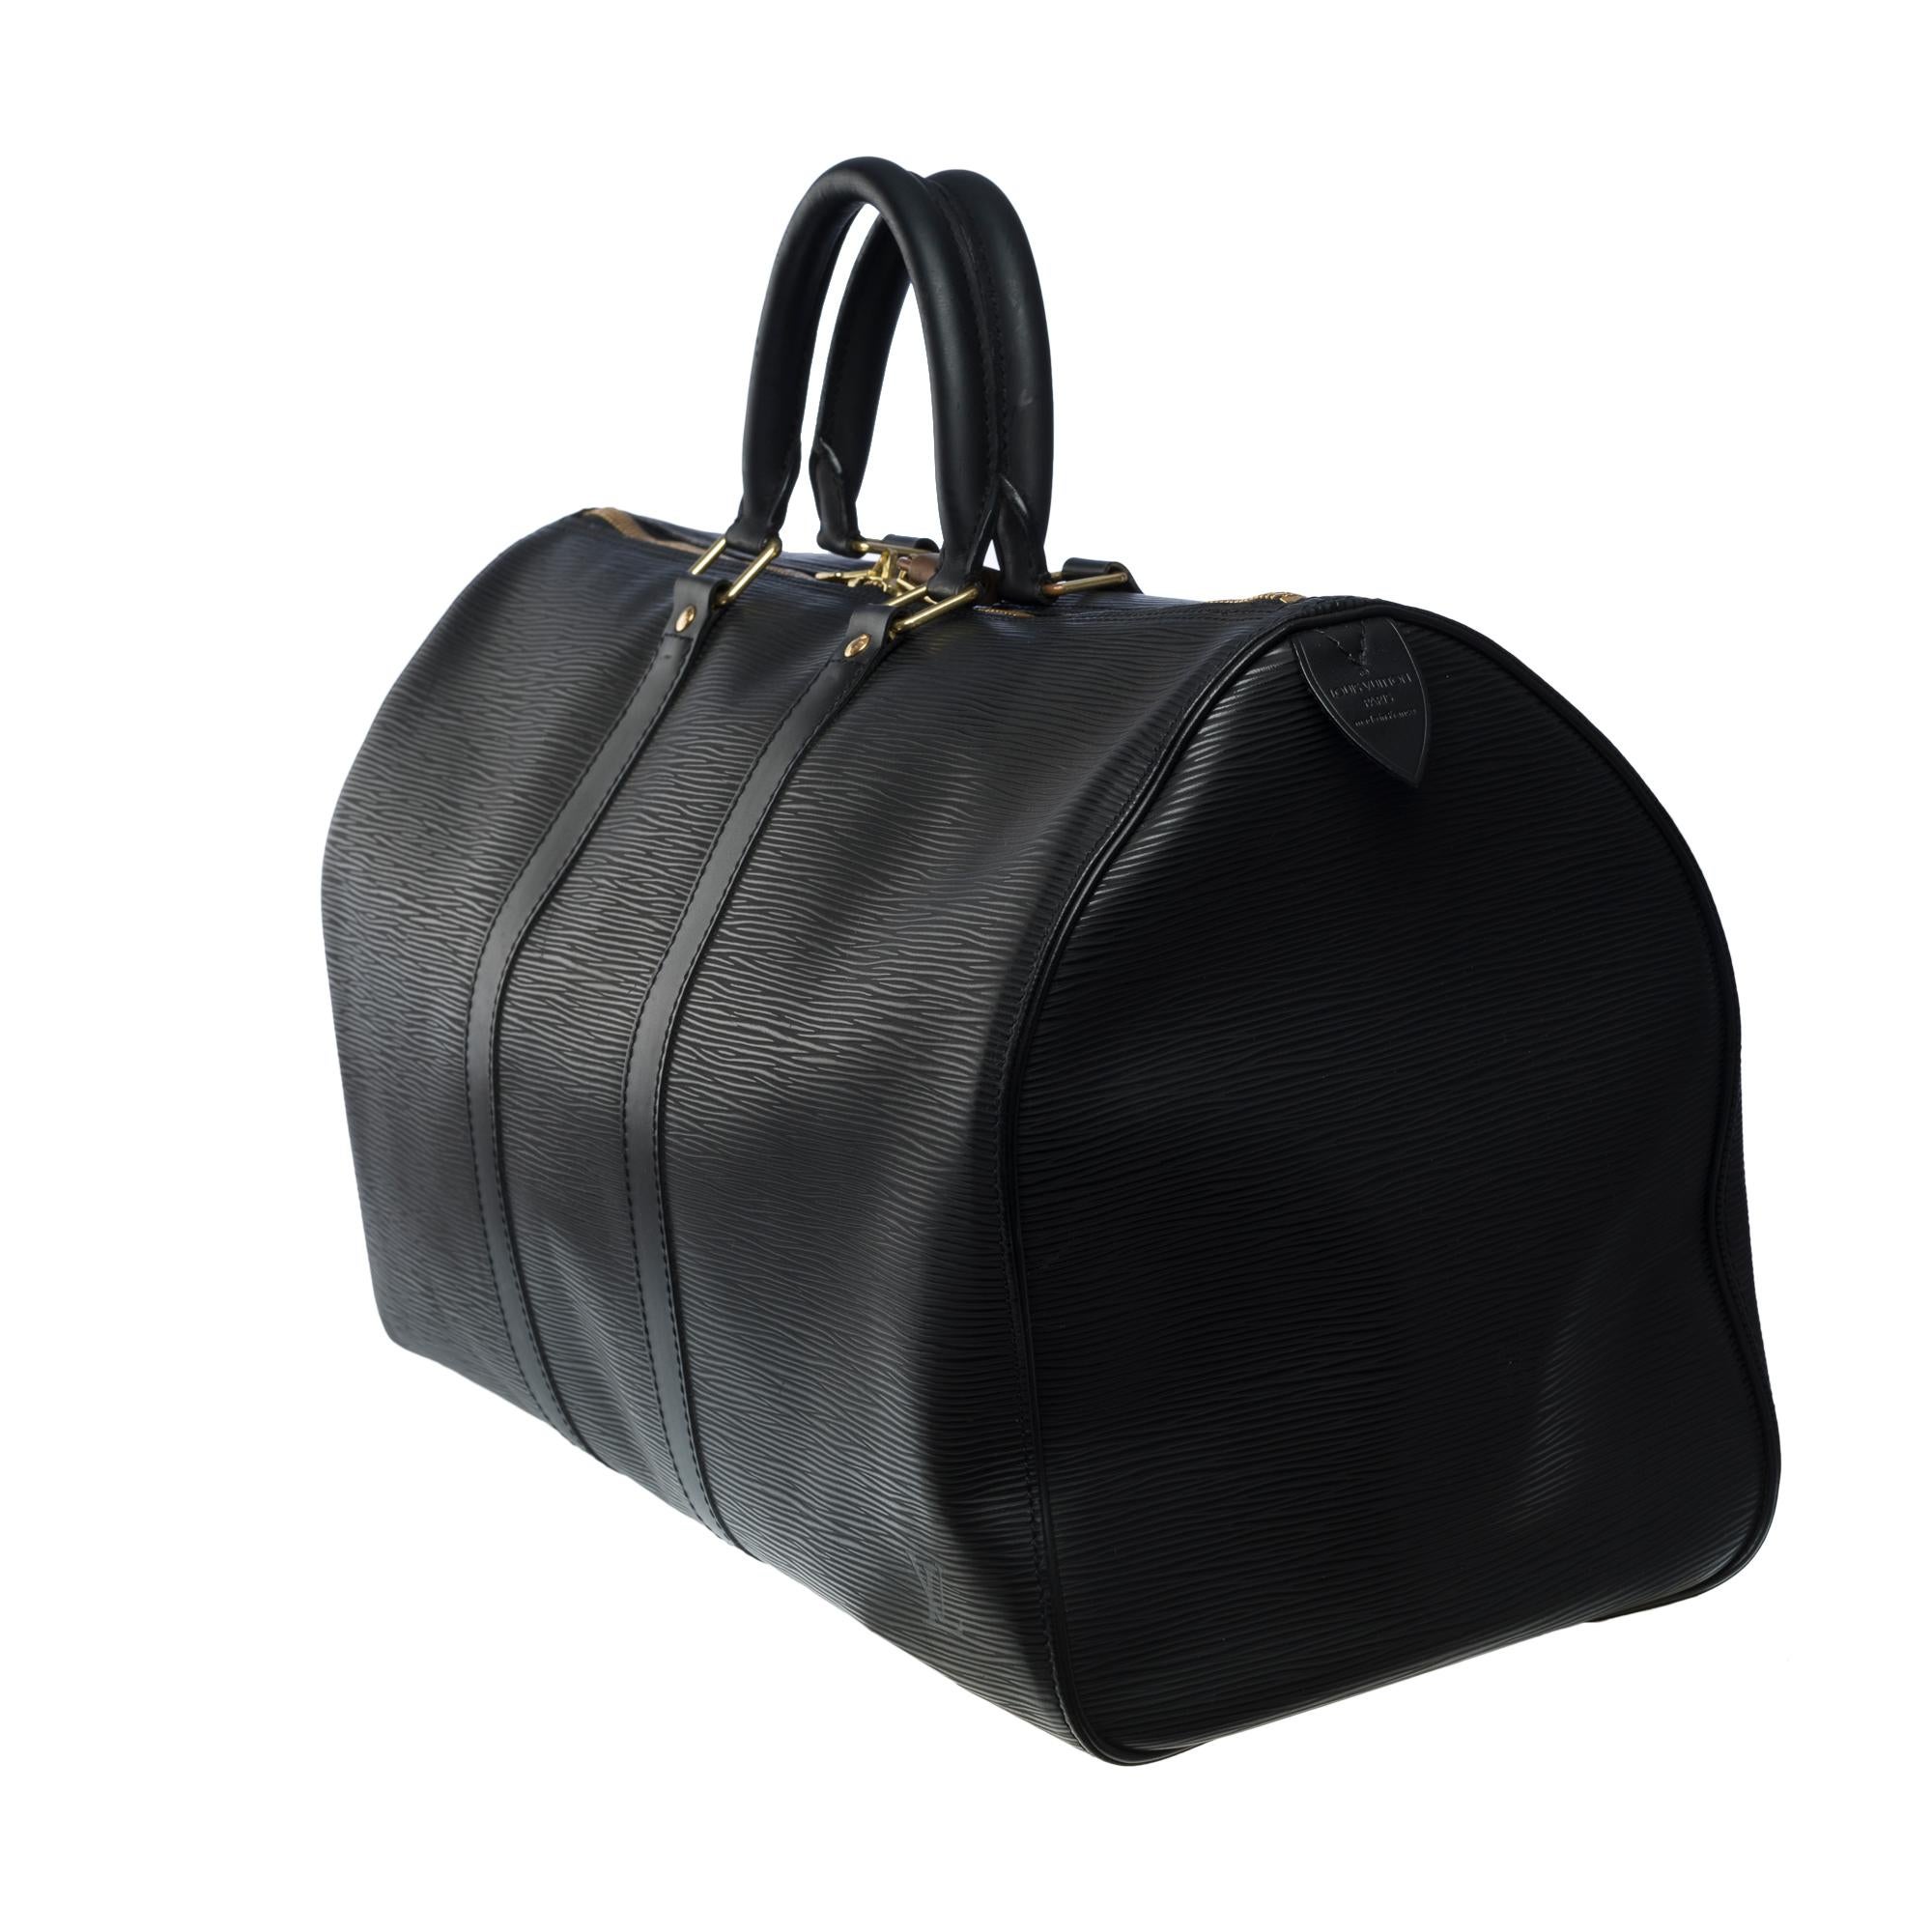 The very Chic Louis Vuitton Keepall 45 Travel bag in black epi leather, GHW 1